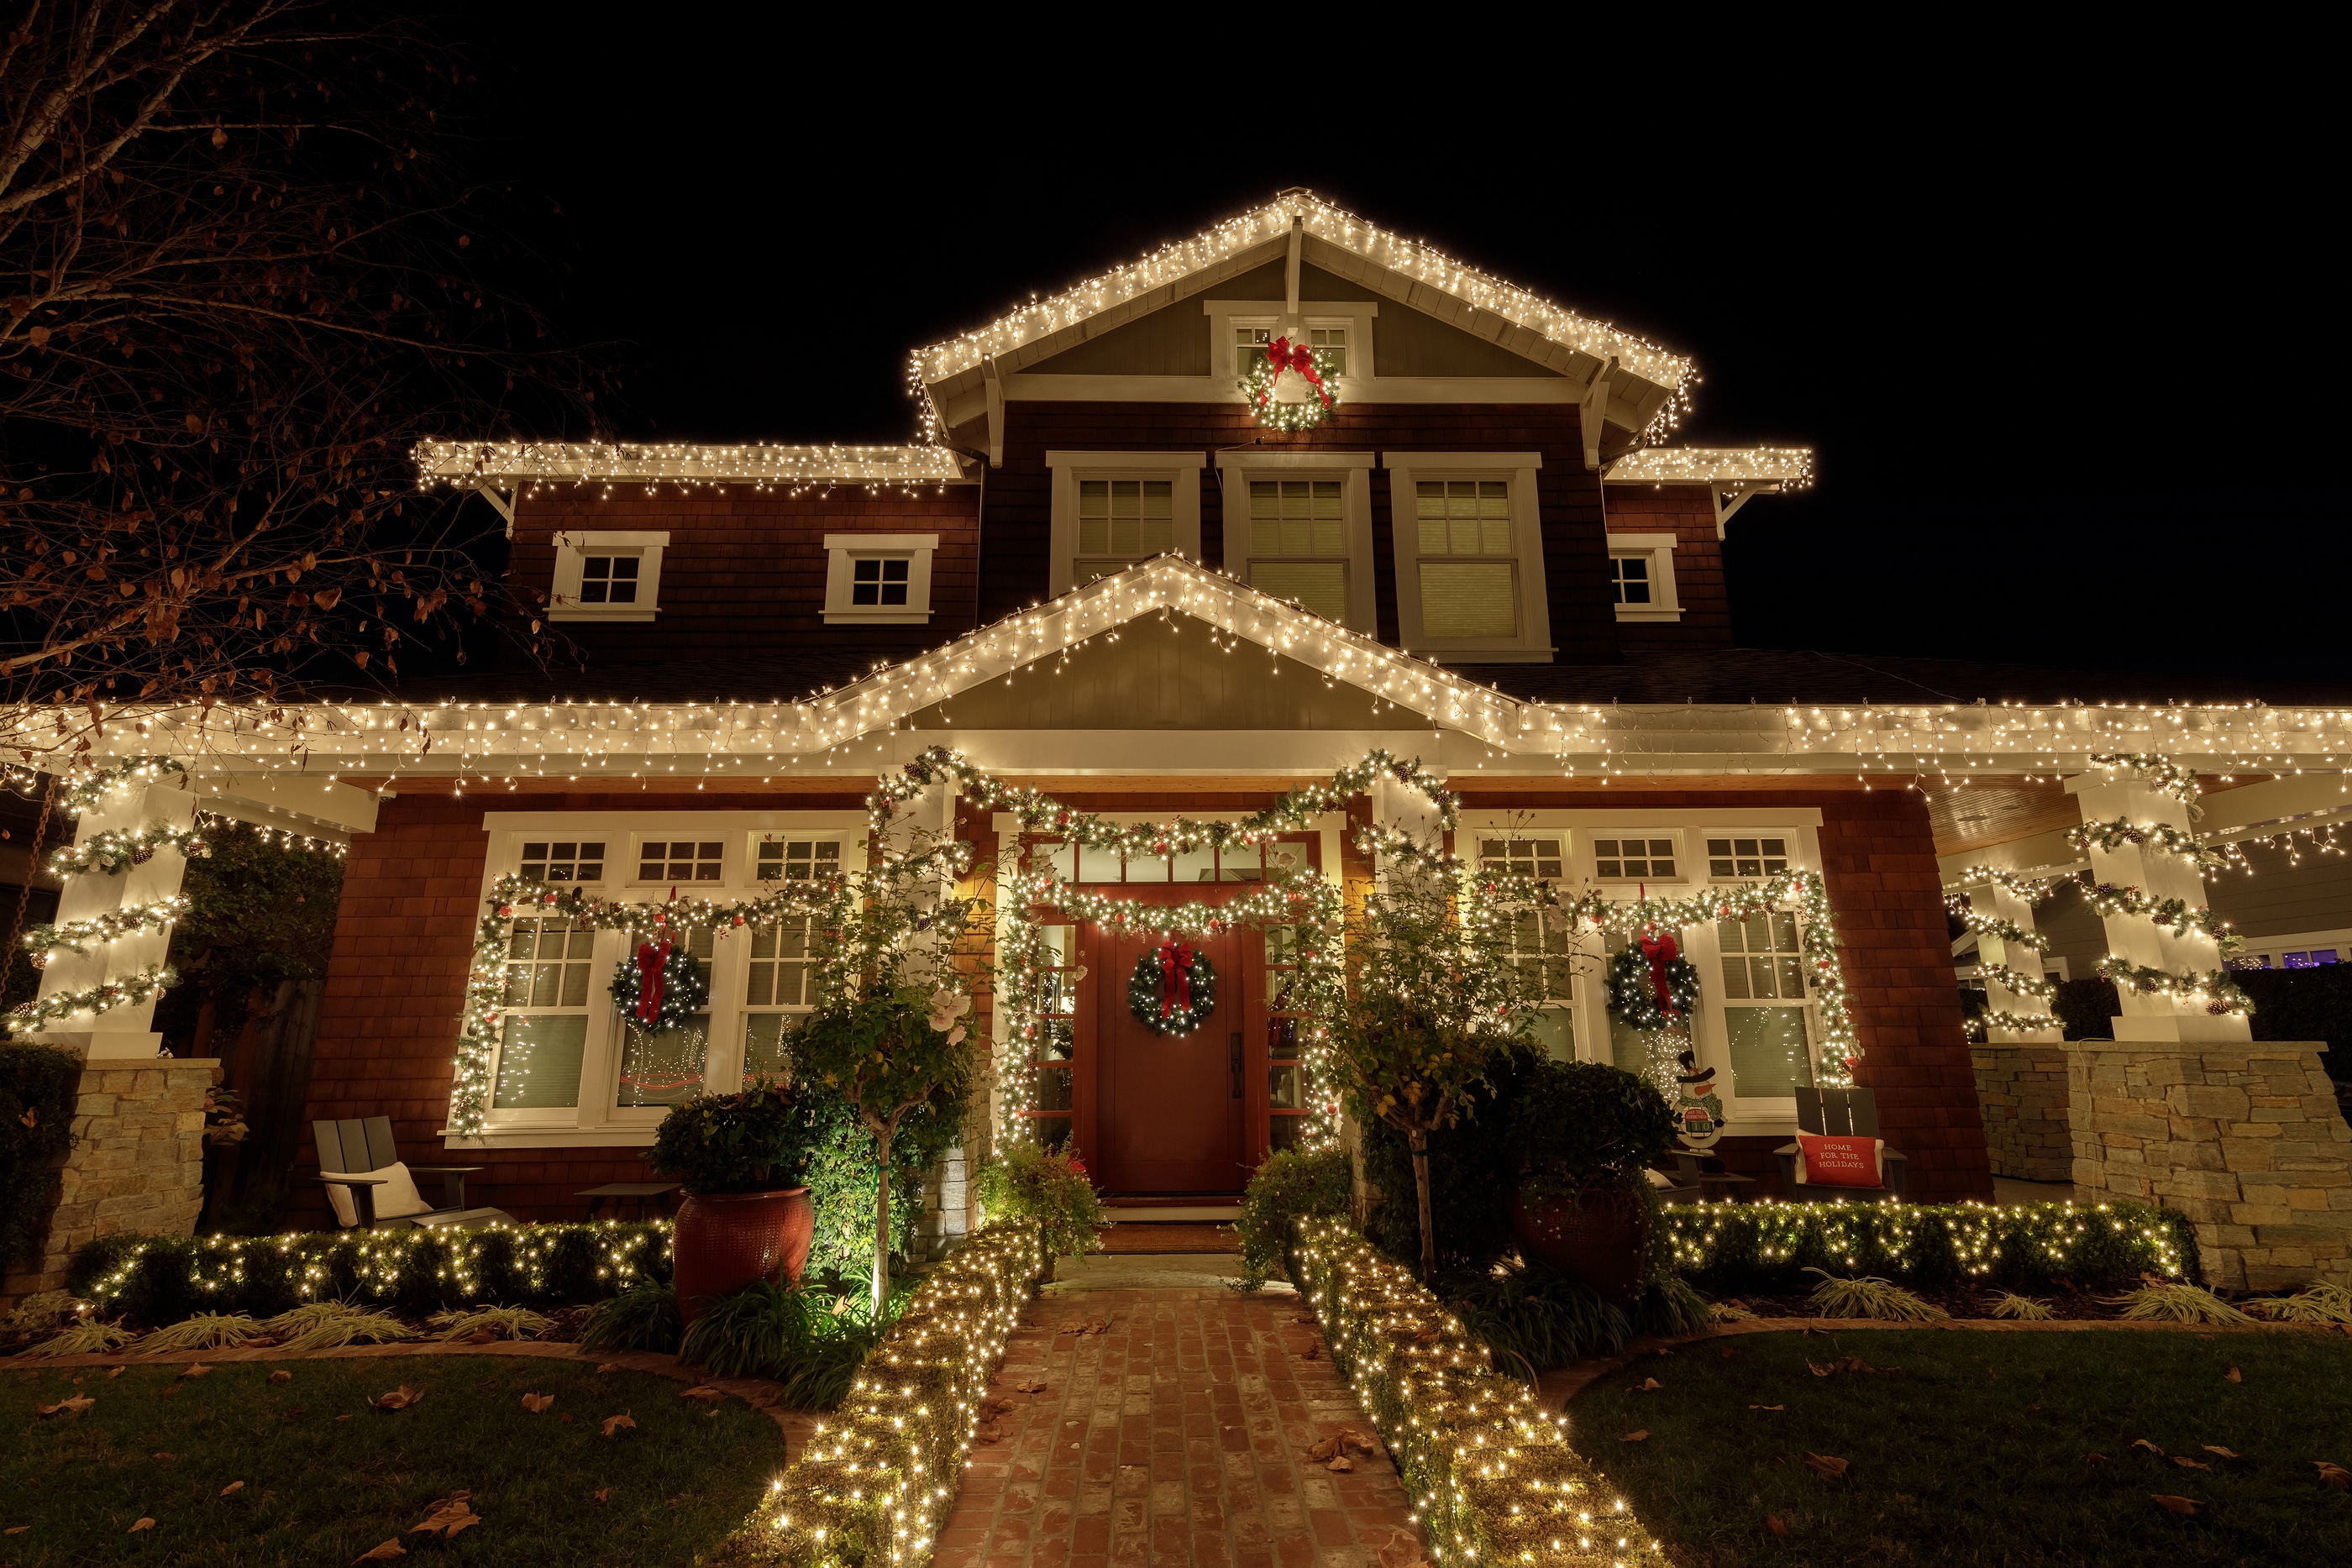 3 Fun Facts About Holiday LIghting